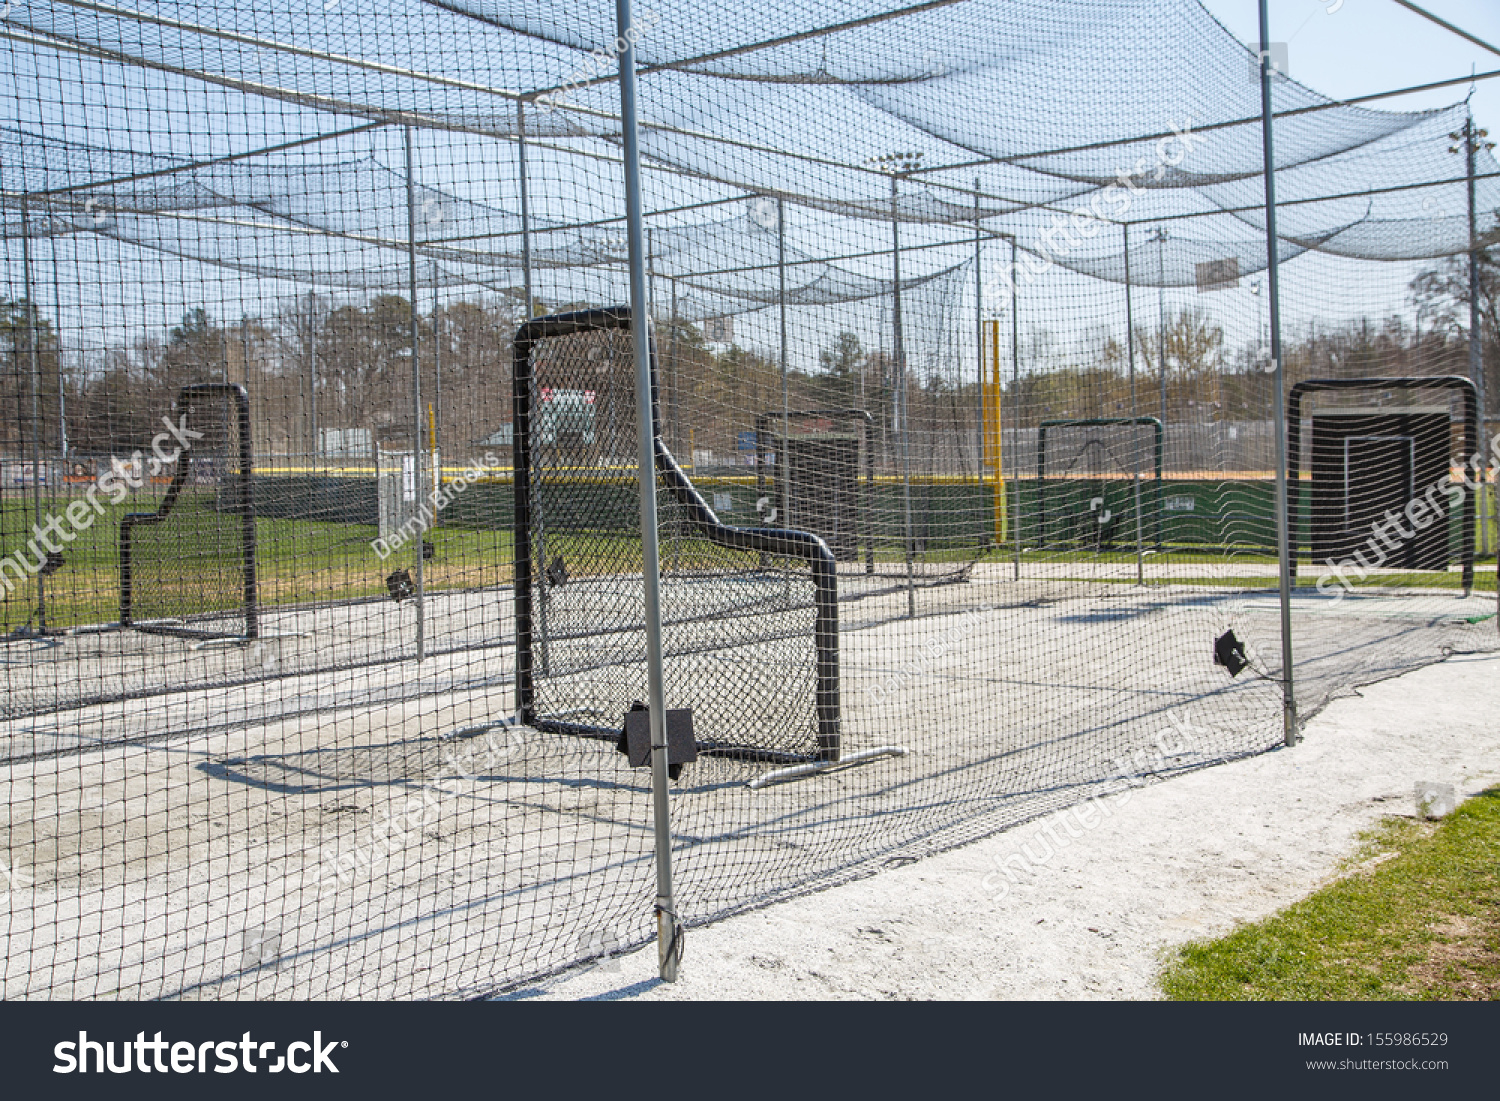 Chain link batting cages in a public baseball park #155986529